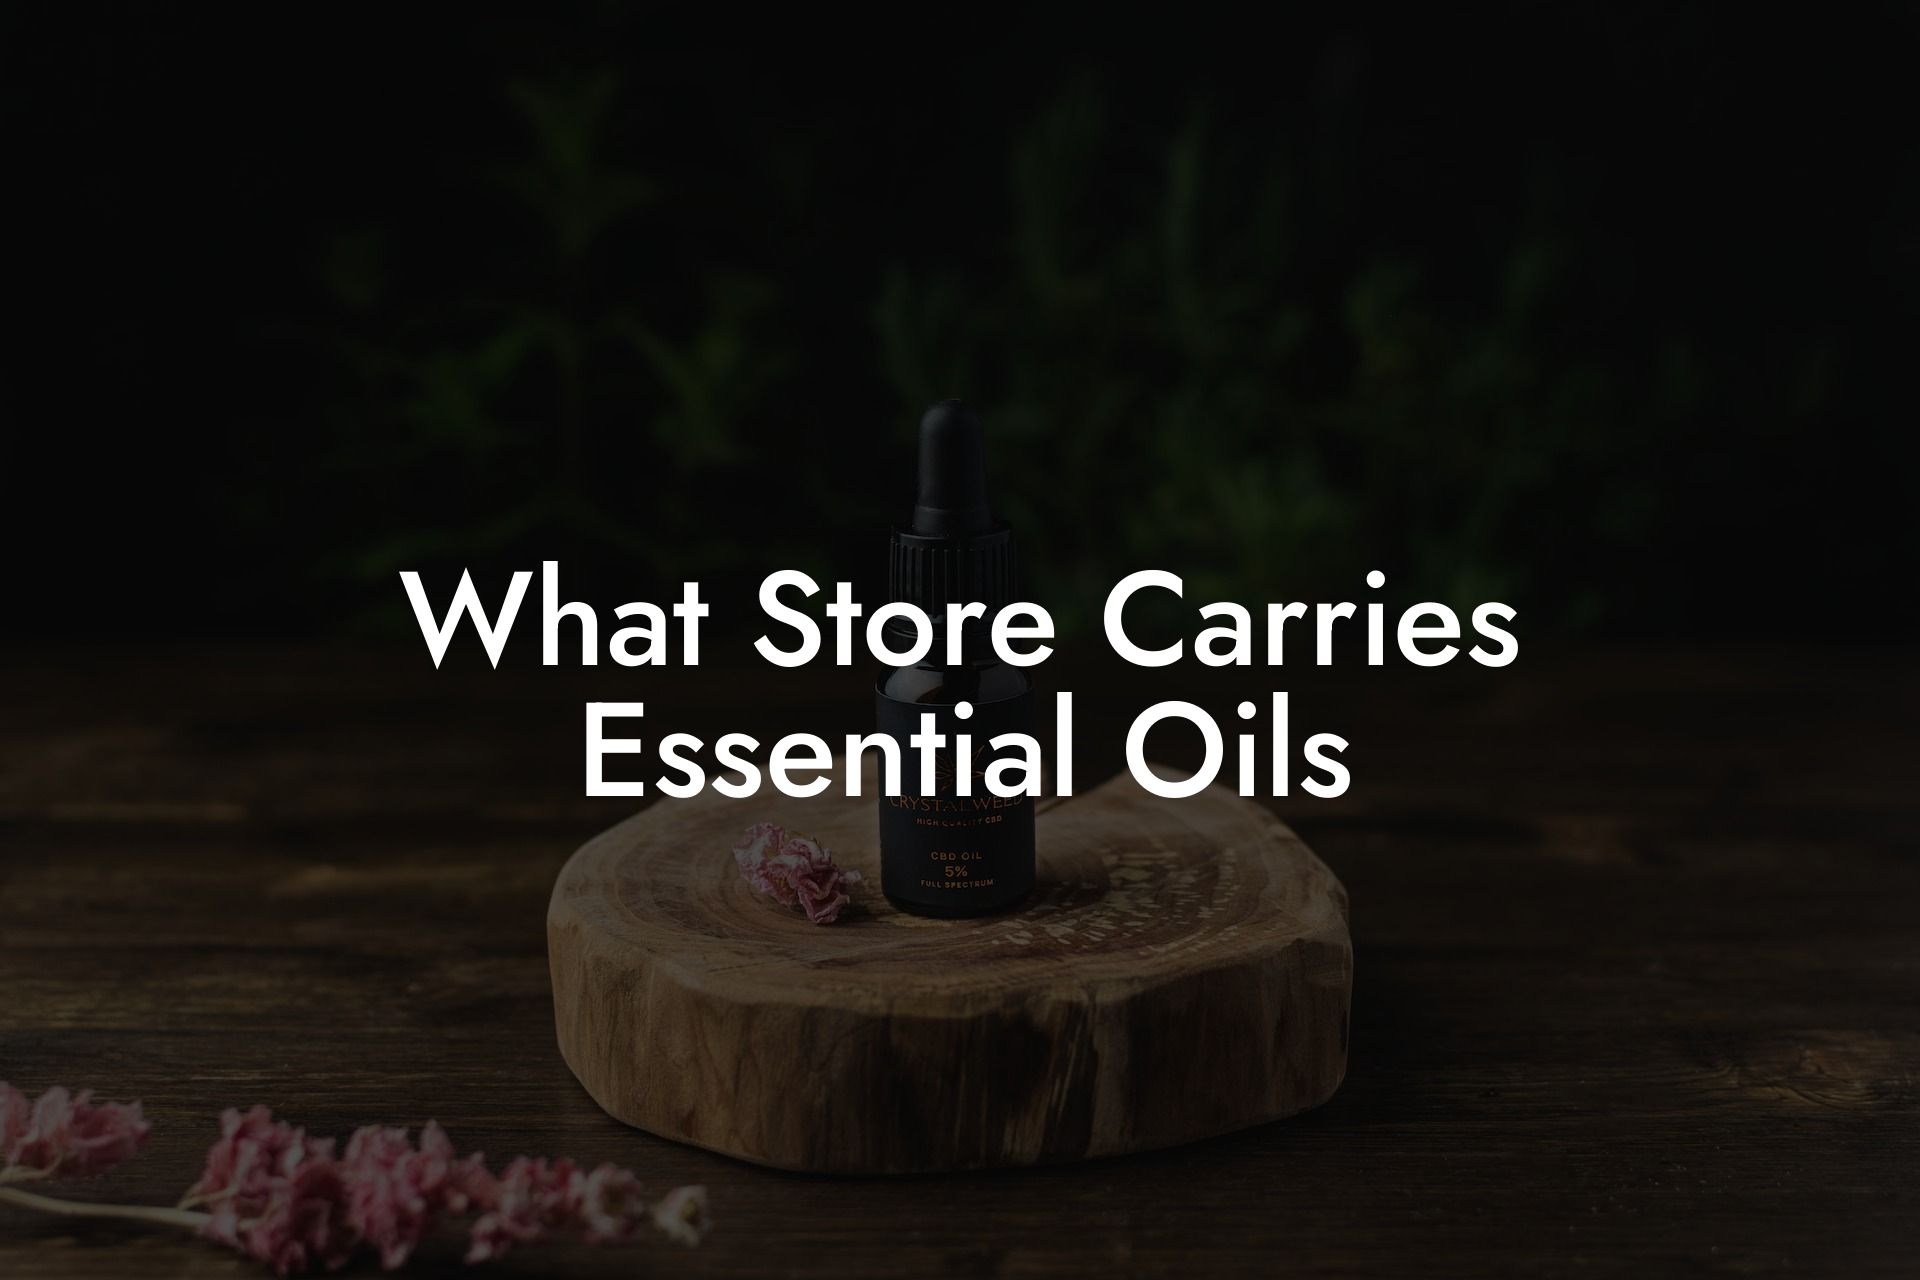 What Store Carries Essential Oils